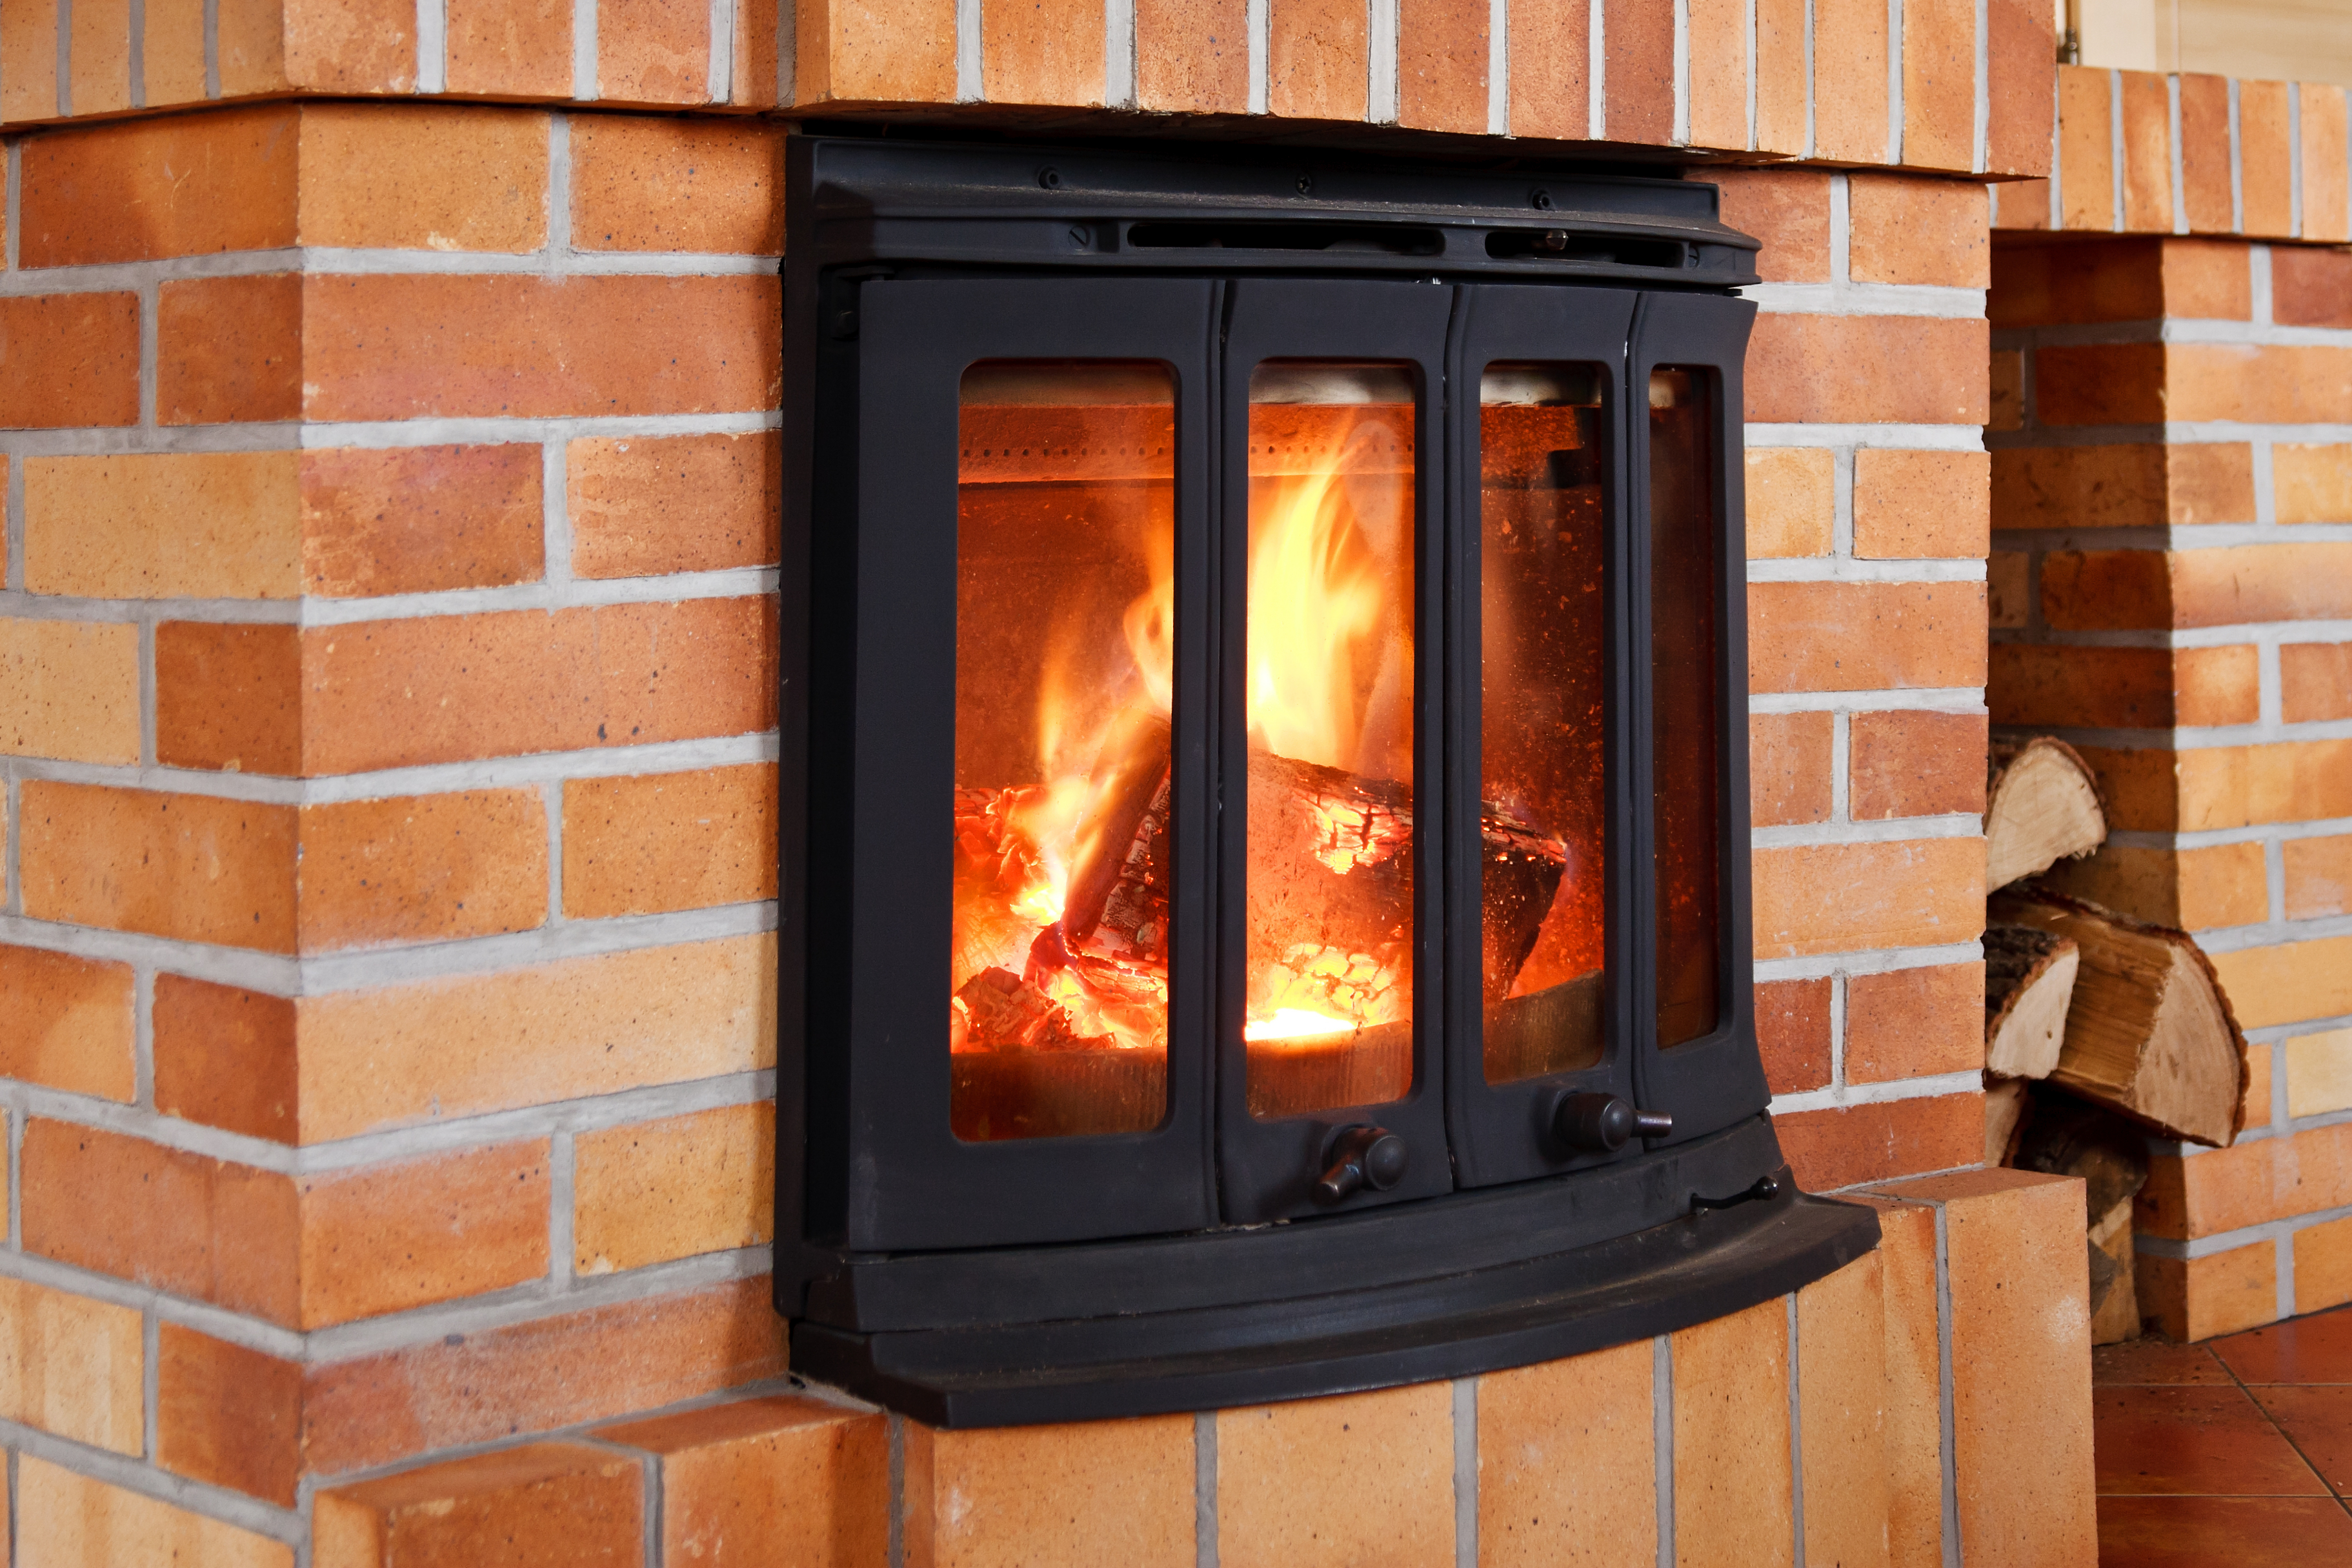 Upgrading from a masonry fireplace to an insert can save you real money this winter. To find which is best for you